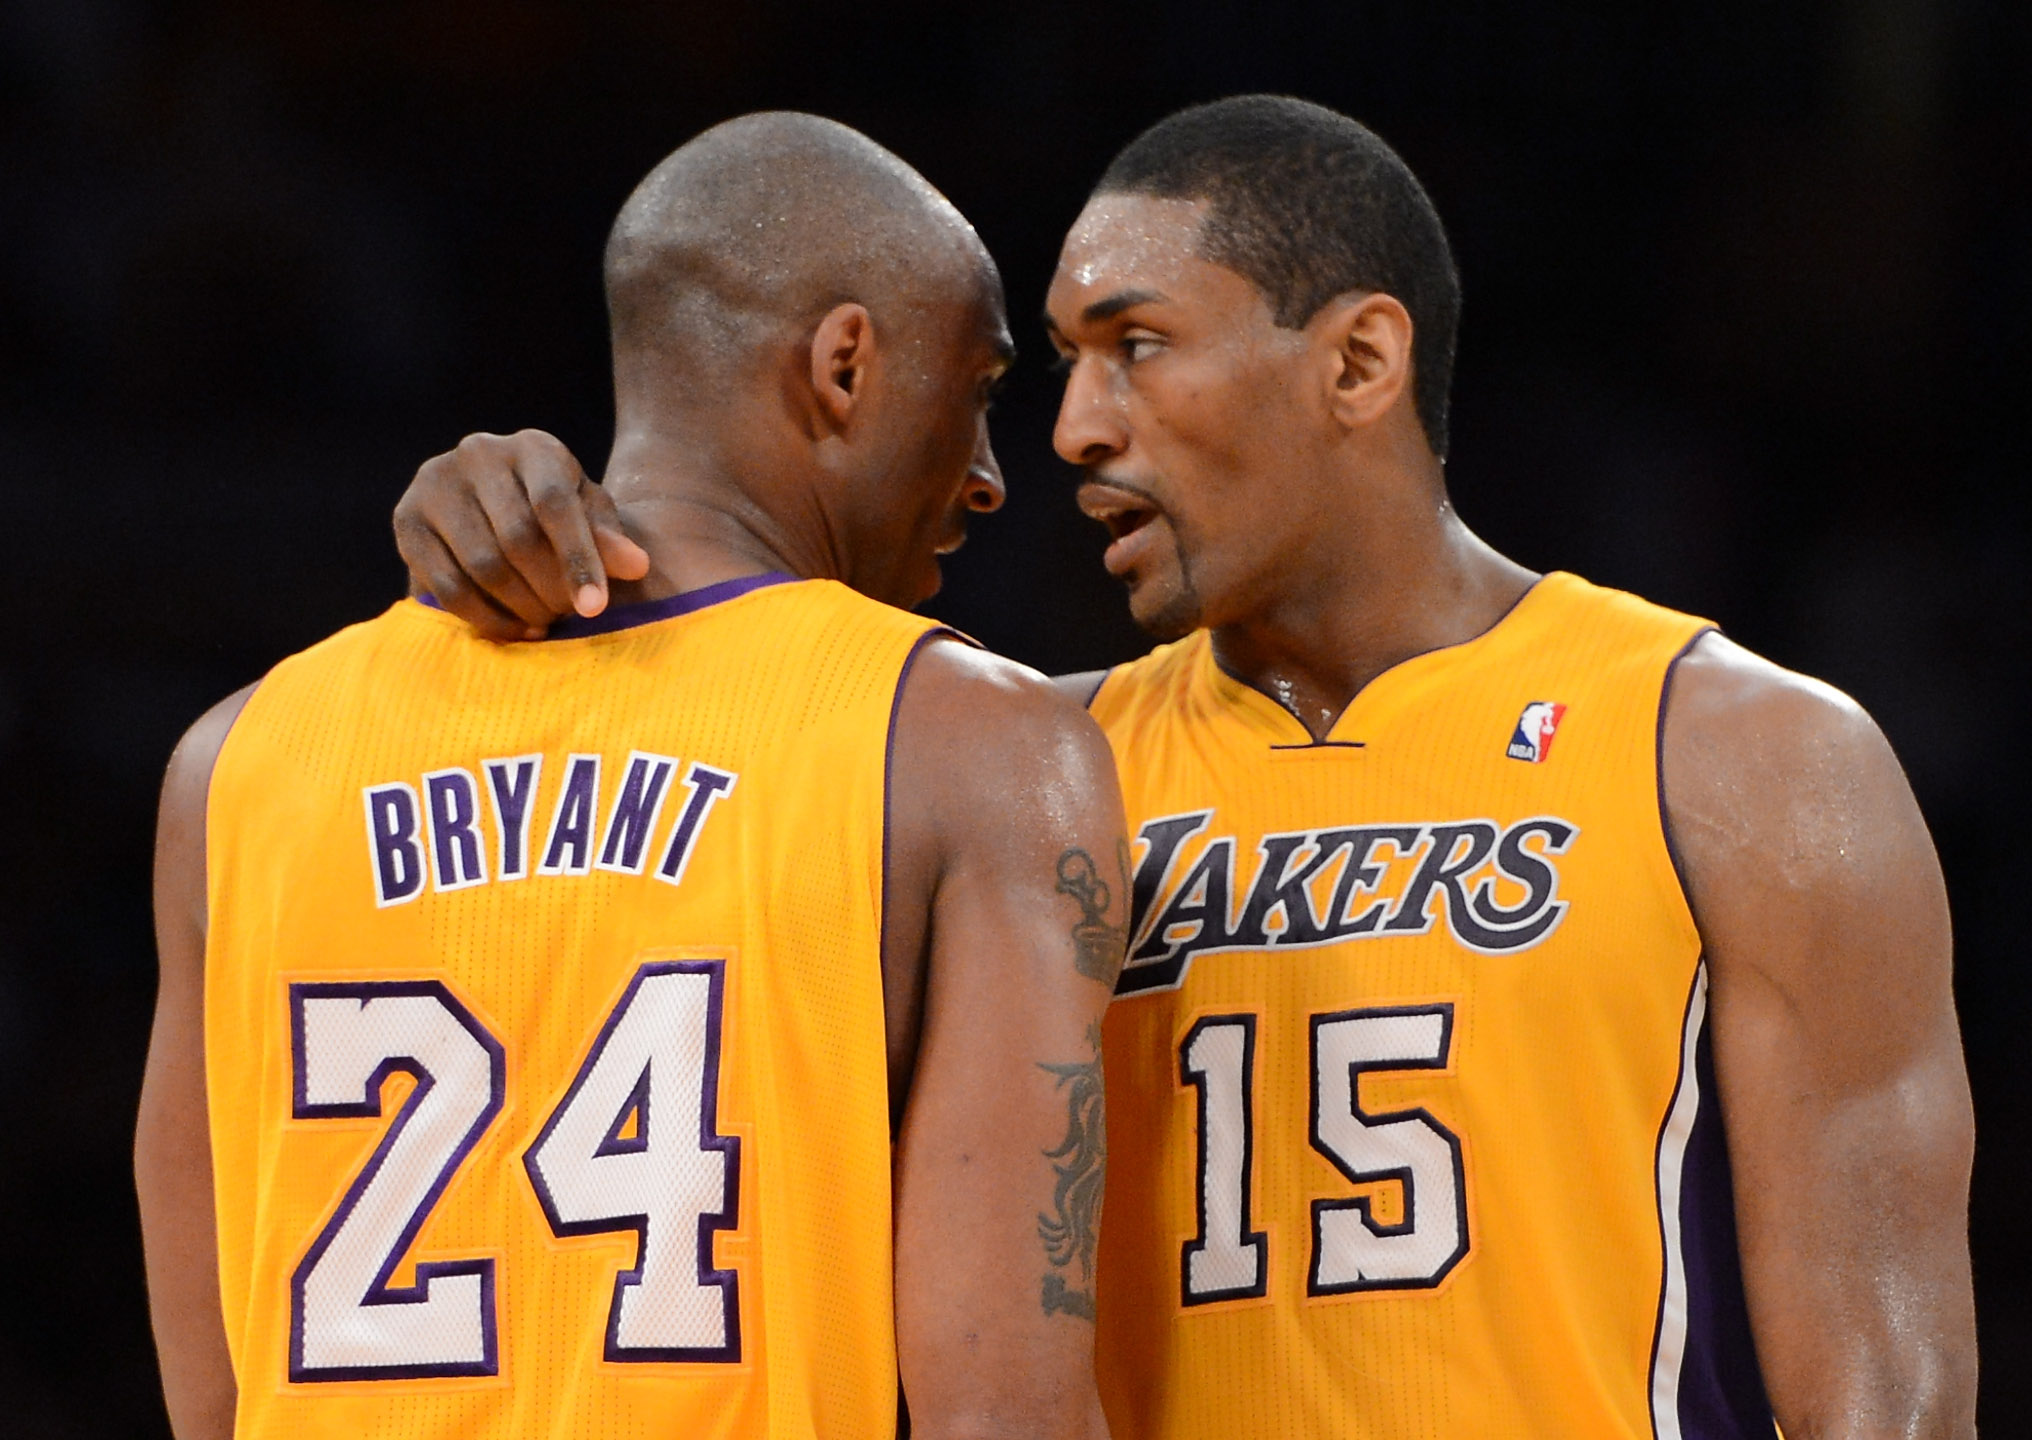 ORG XMIT: 143577168 LOS ANGELES, CA - MAY 12:  Kobe Bryant #24 of the Los Angeles Lakers talks with teammate Metta World Peace #15 in the second quarter while taking on the Denver Nuggets in Game Seven of the Western Conference Quarterfinals in the 2012 NBA Playoffs on May 12, 2012 at Staples Center in Los Angeles, California. NOTE TO USER: User expressly acknowledges and agrees that, by downloading and or using this photograph, User is consenting to the terms and conditions of the Getty Images License Agreement.  (Photo by Harry How/Getty Images) ORIG FILE ID: 144264195